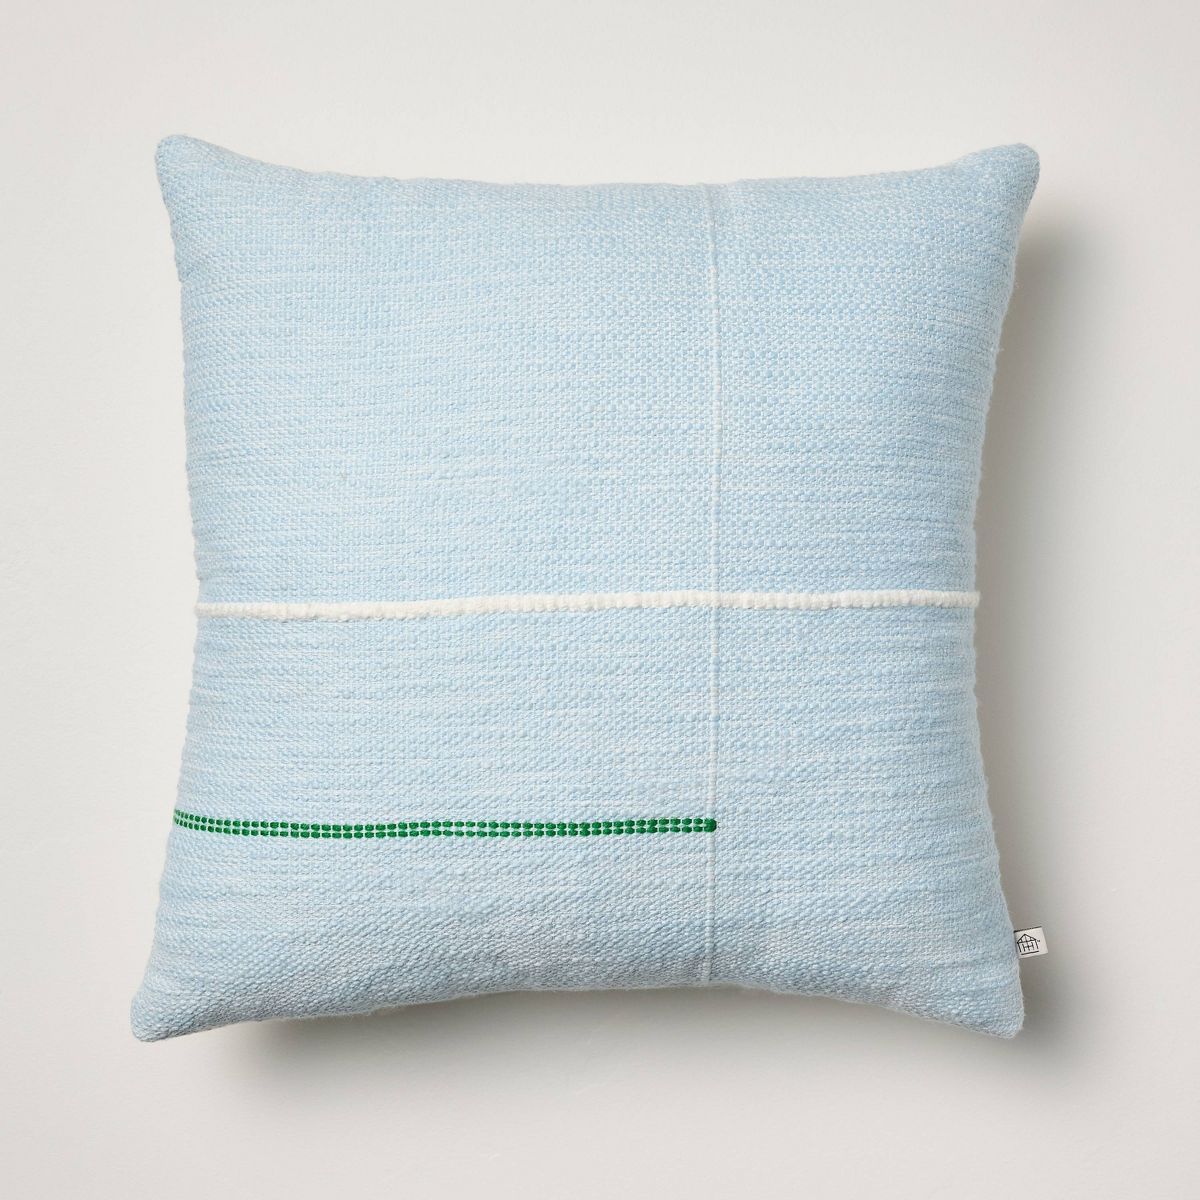 18"x18" Asymmetrical Stripe Indoor/Outdoor Square Throw Pillow - Hearth & Hand™ with Magnolia | Target